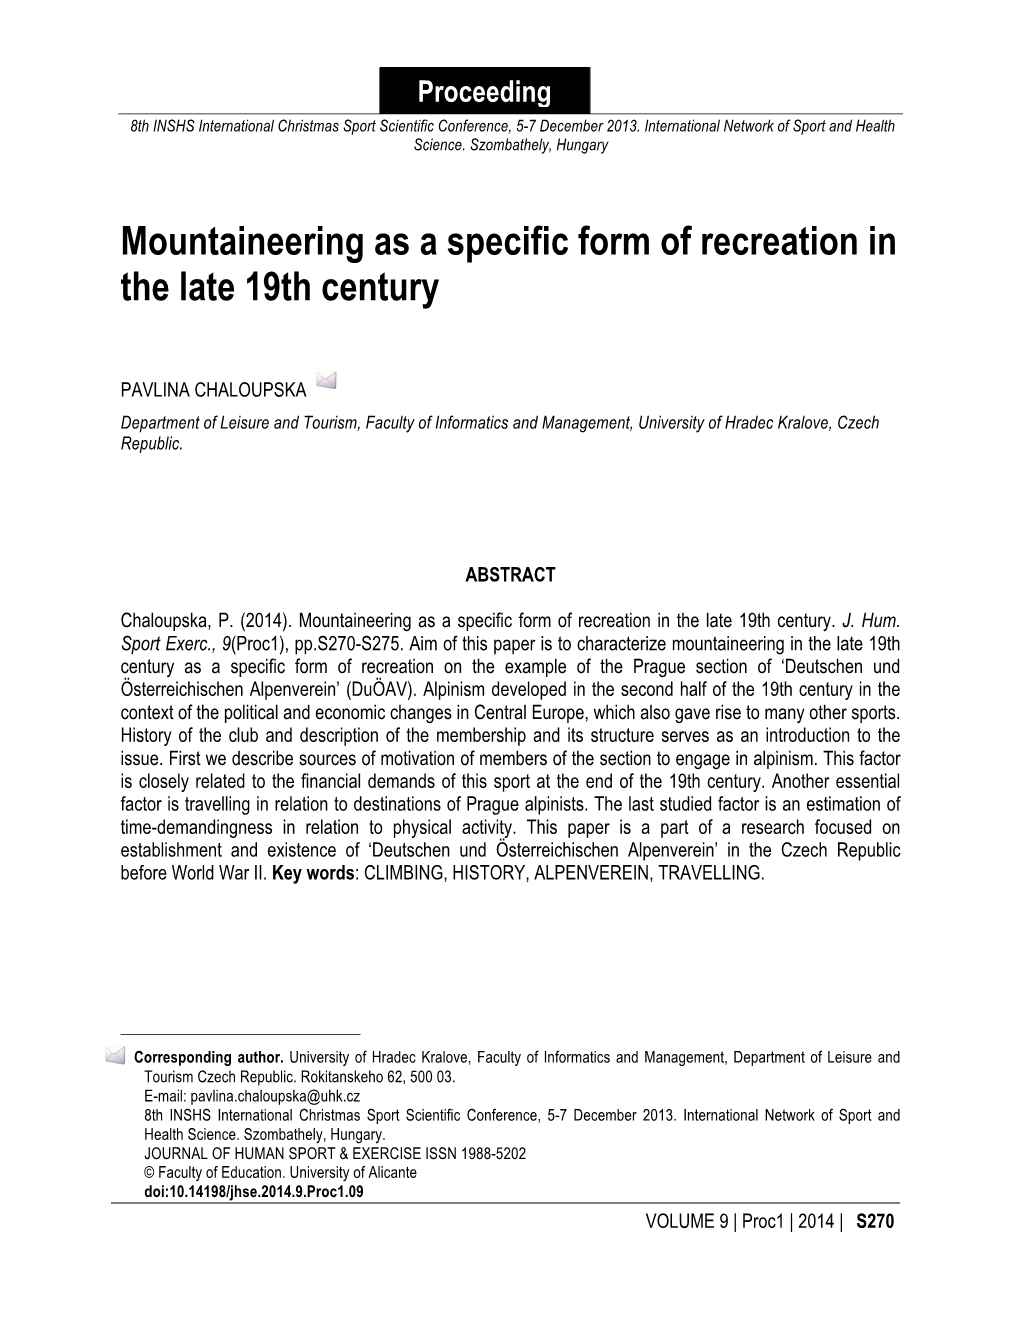 Mountaineering As a Specific Form of Recreation in the Late 19Th Century